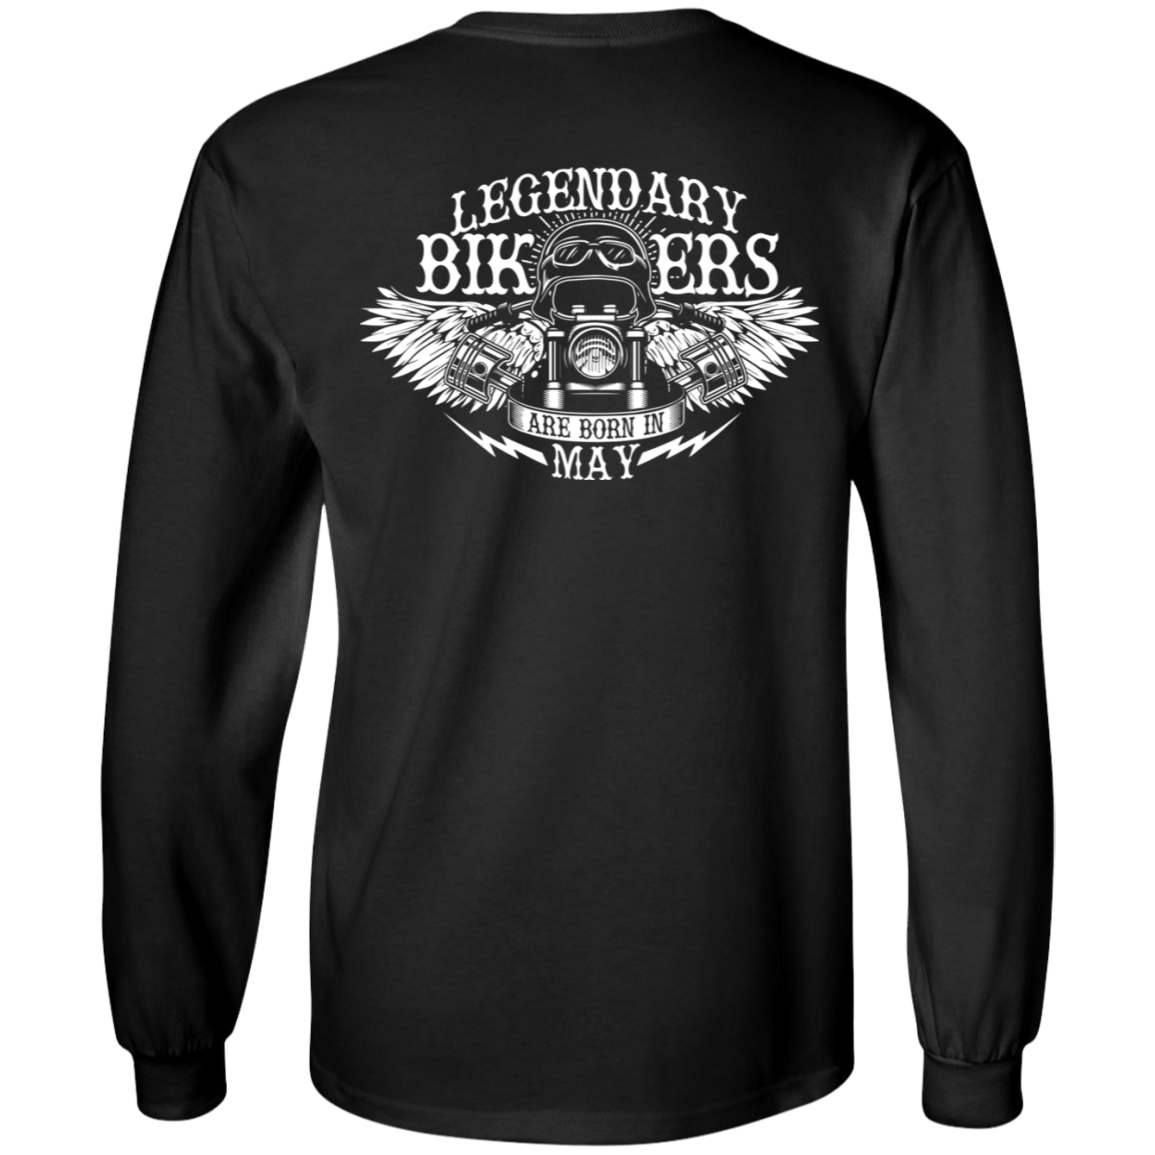 Legendary Bikers Are Born in May Long Sleeves